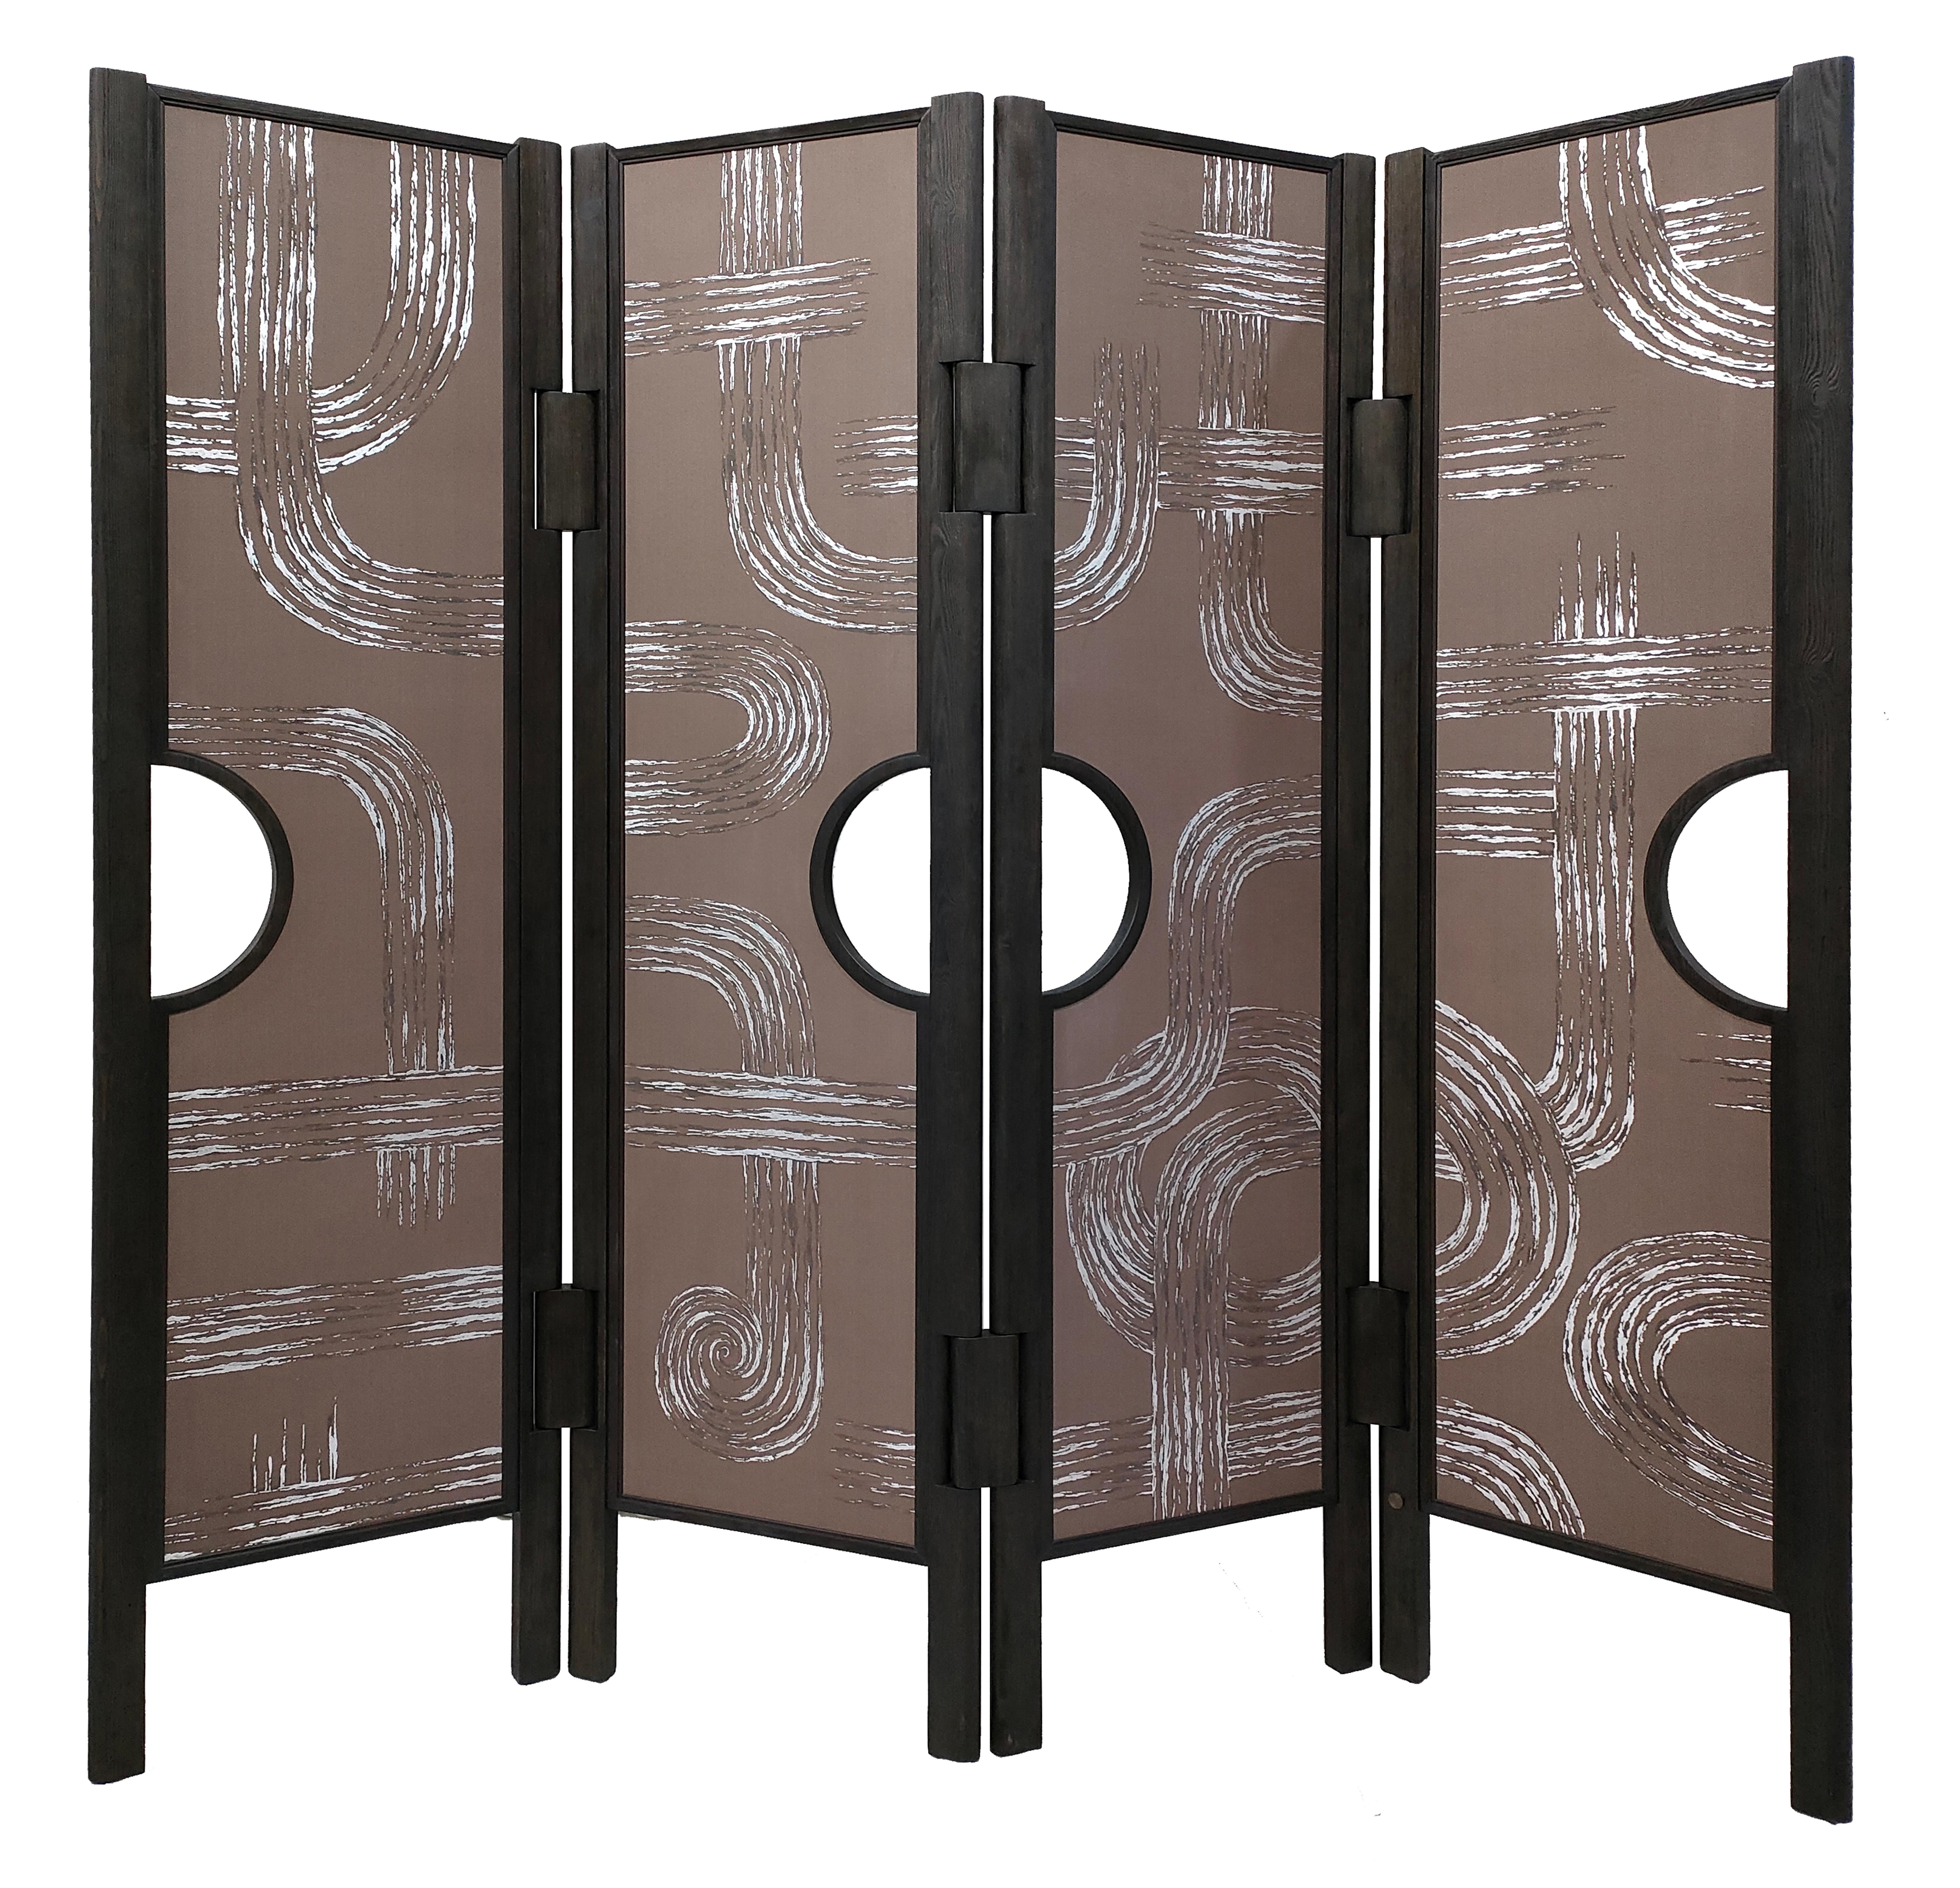 Description: Screen with 4 panels in pinewood and oak wood with De Gournay covering
Color: Charcoal and raw earth 
Size: 219 x 4 x 200 H cm
Material: Pinewood and oak wood
Collection: Art Déco Garden.